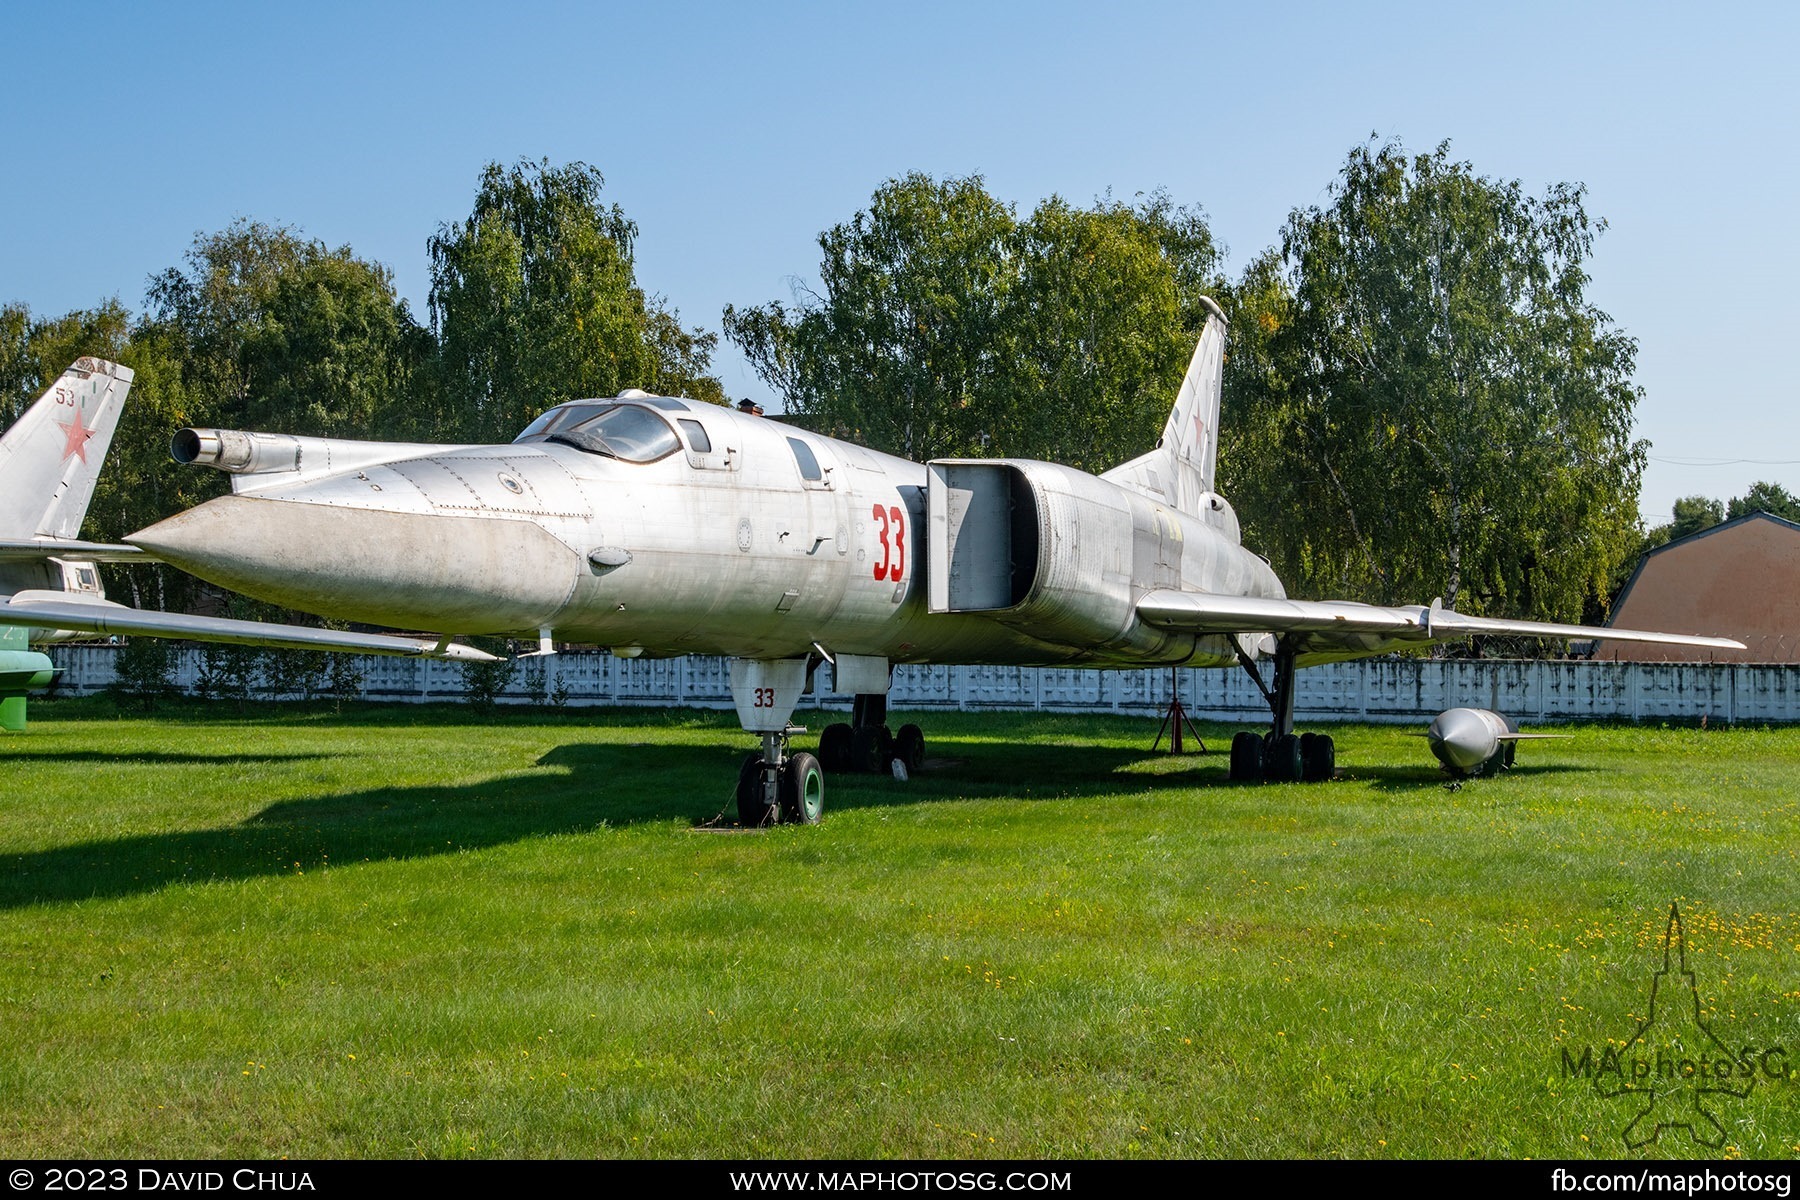 Tupolev Tu-22M. The first Soviet supersonic long-range sweep-wing jet bomber.